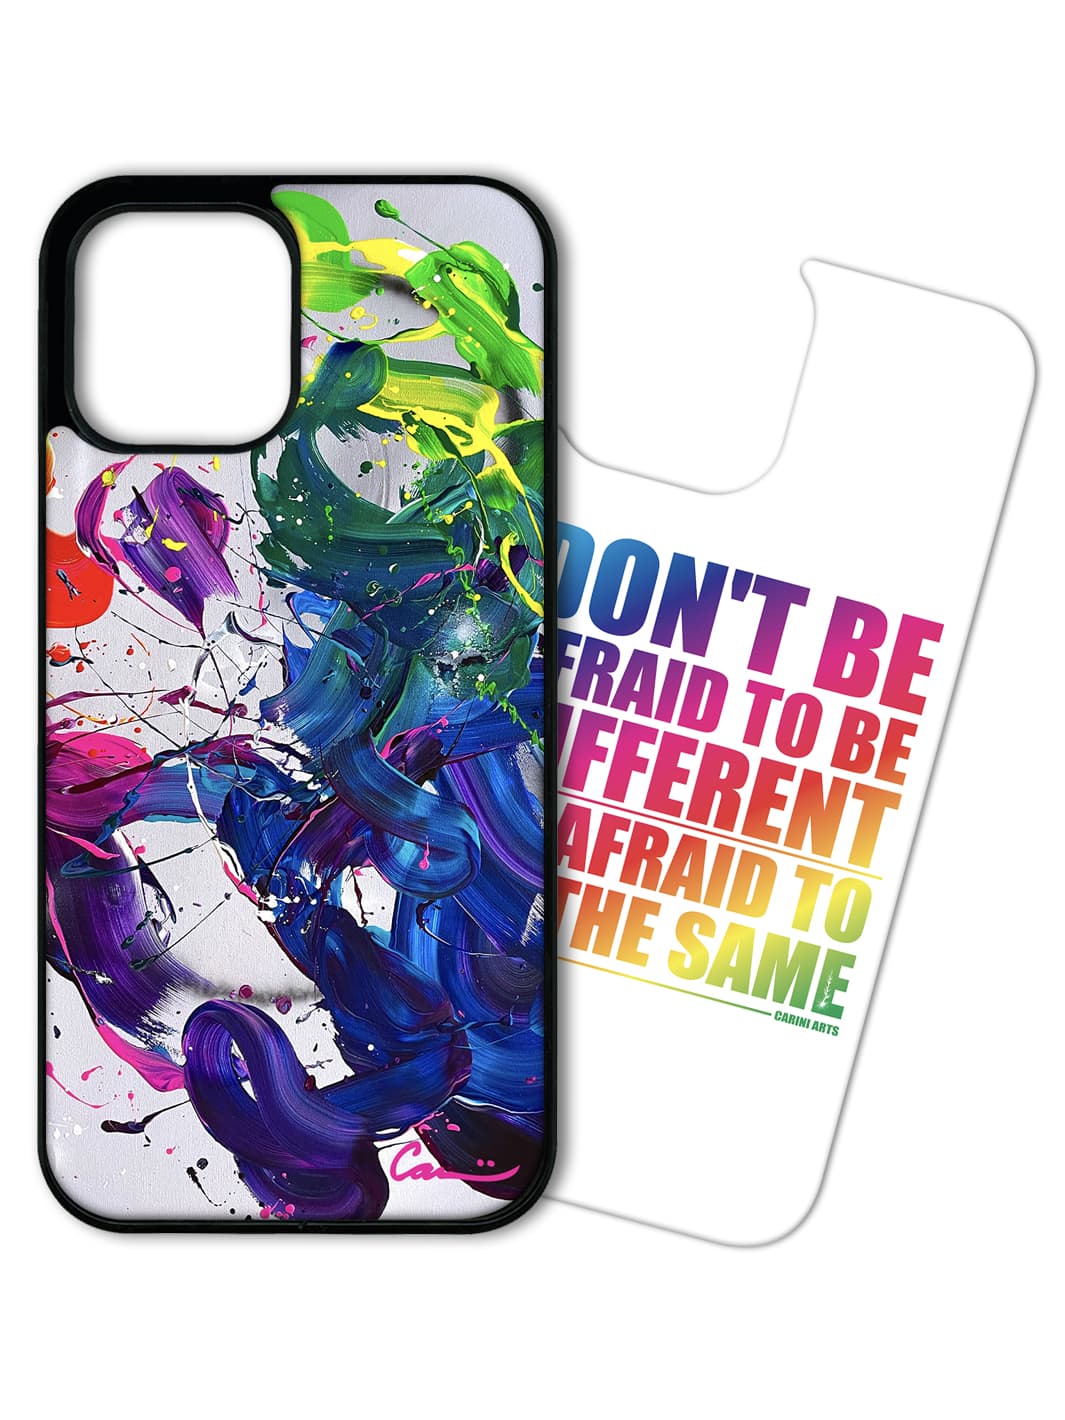 Phone Case Set - Dad, I'm Coming Home